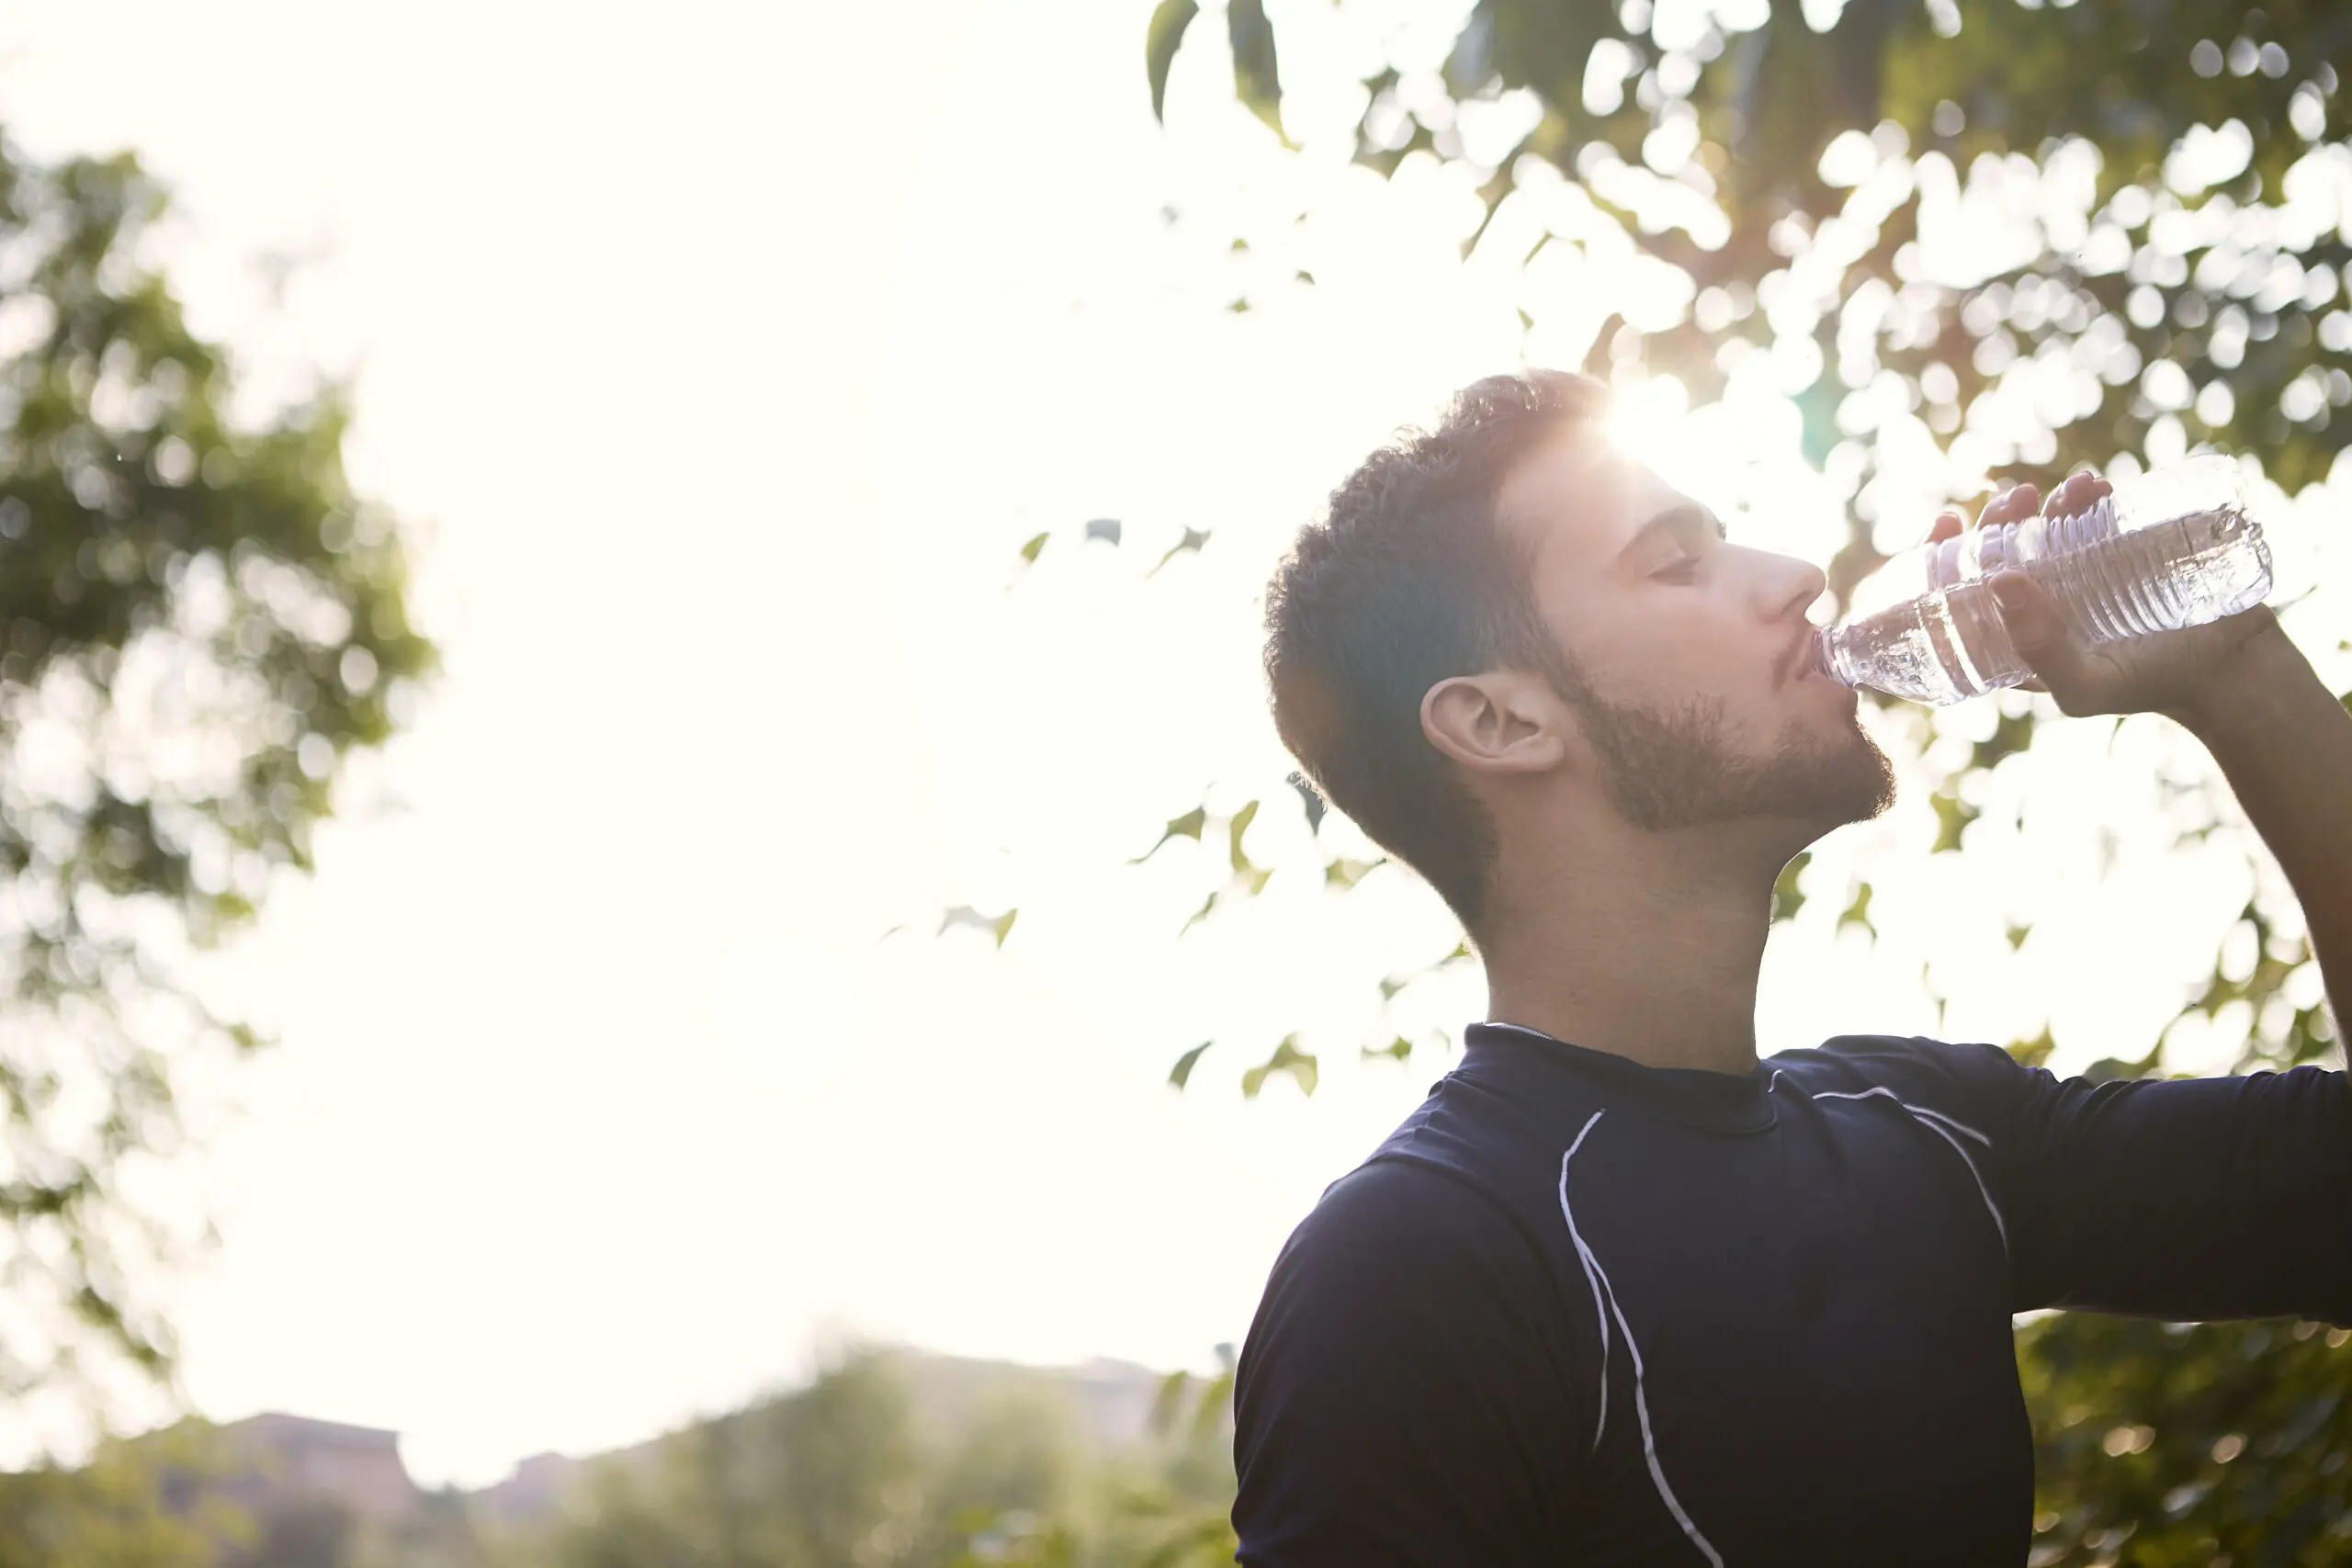 Man drinks water from bottle outdoors scaled